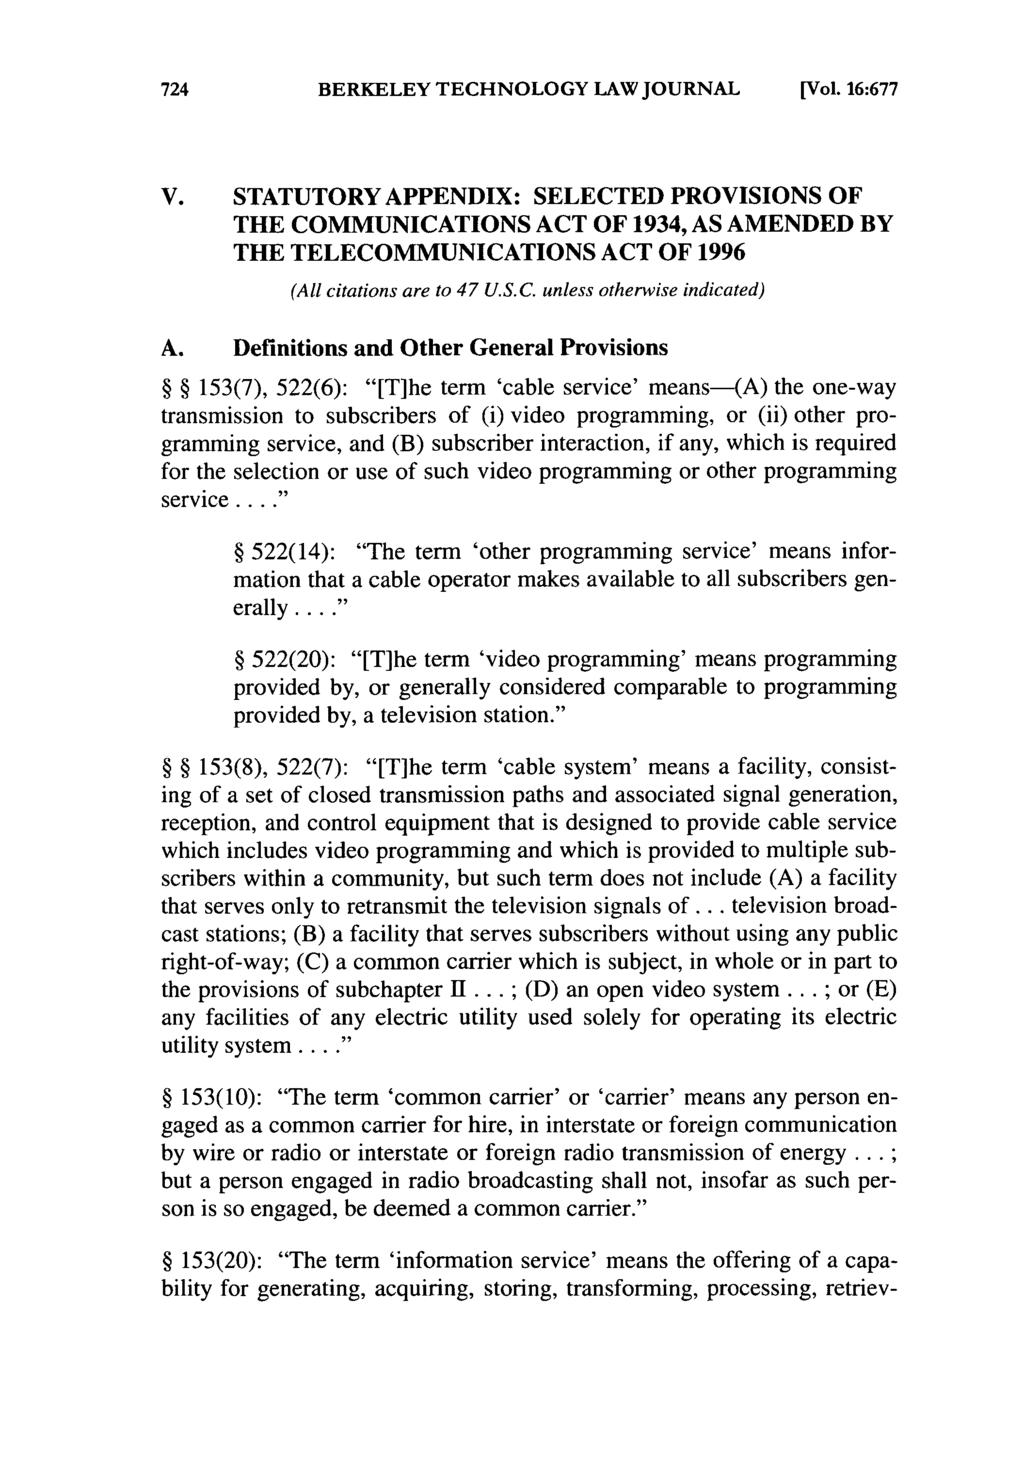 BERKELEY TECHNOLOGY LAW JOURNAL [Vol. 16:677 V. STATUTORY APPENDIX: SELECTED PROVISIONS OF THE COMMUNICATIONS ACT OF 1934, AS AMENDED BY THE TELECOMMUNICATIONS ACT OF 1996 (All citations are to 47 U.